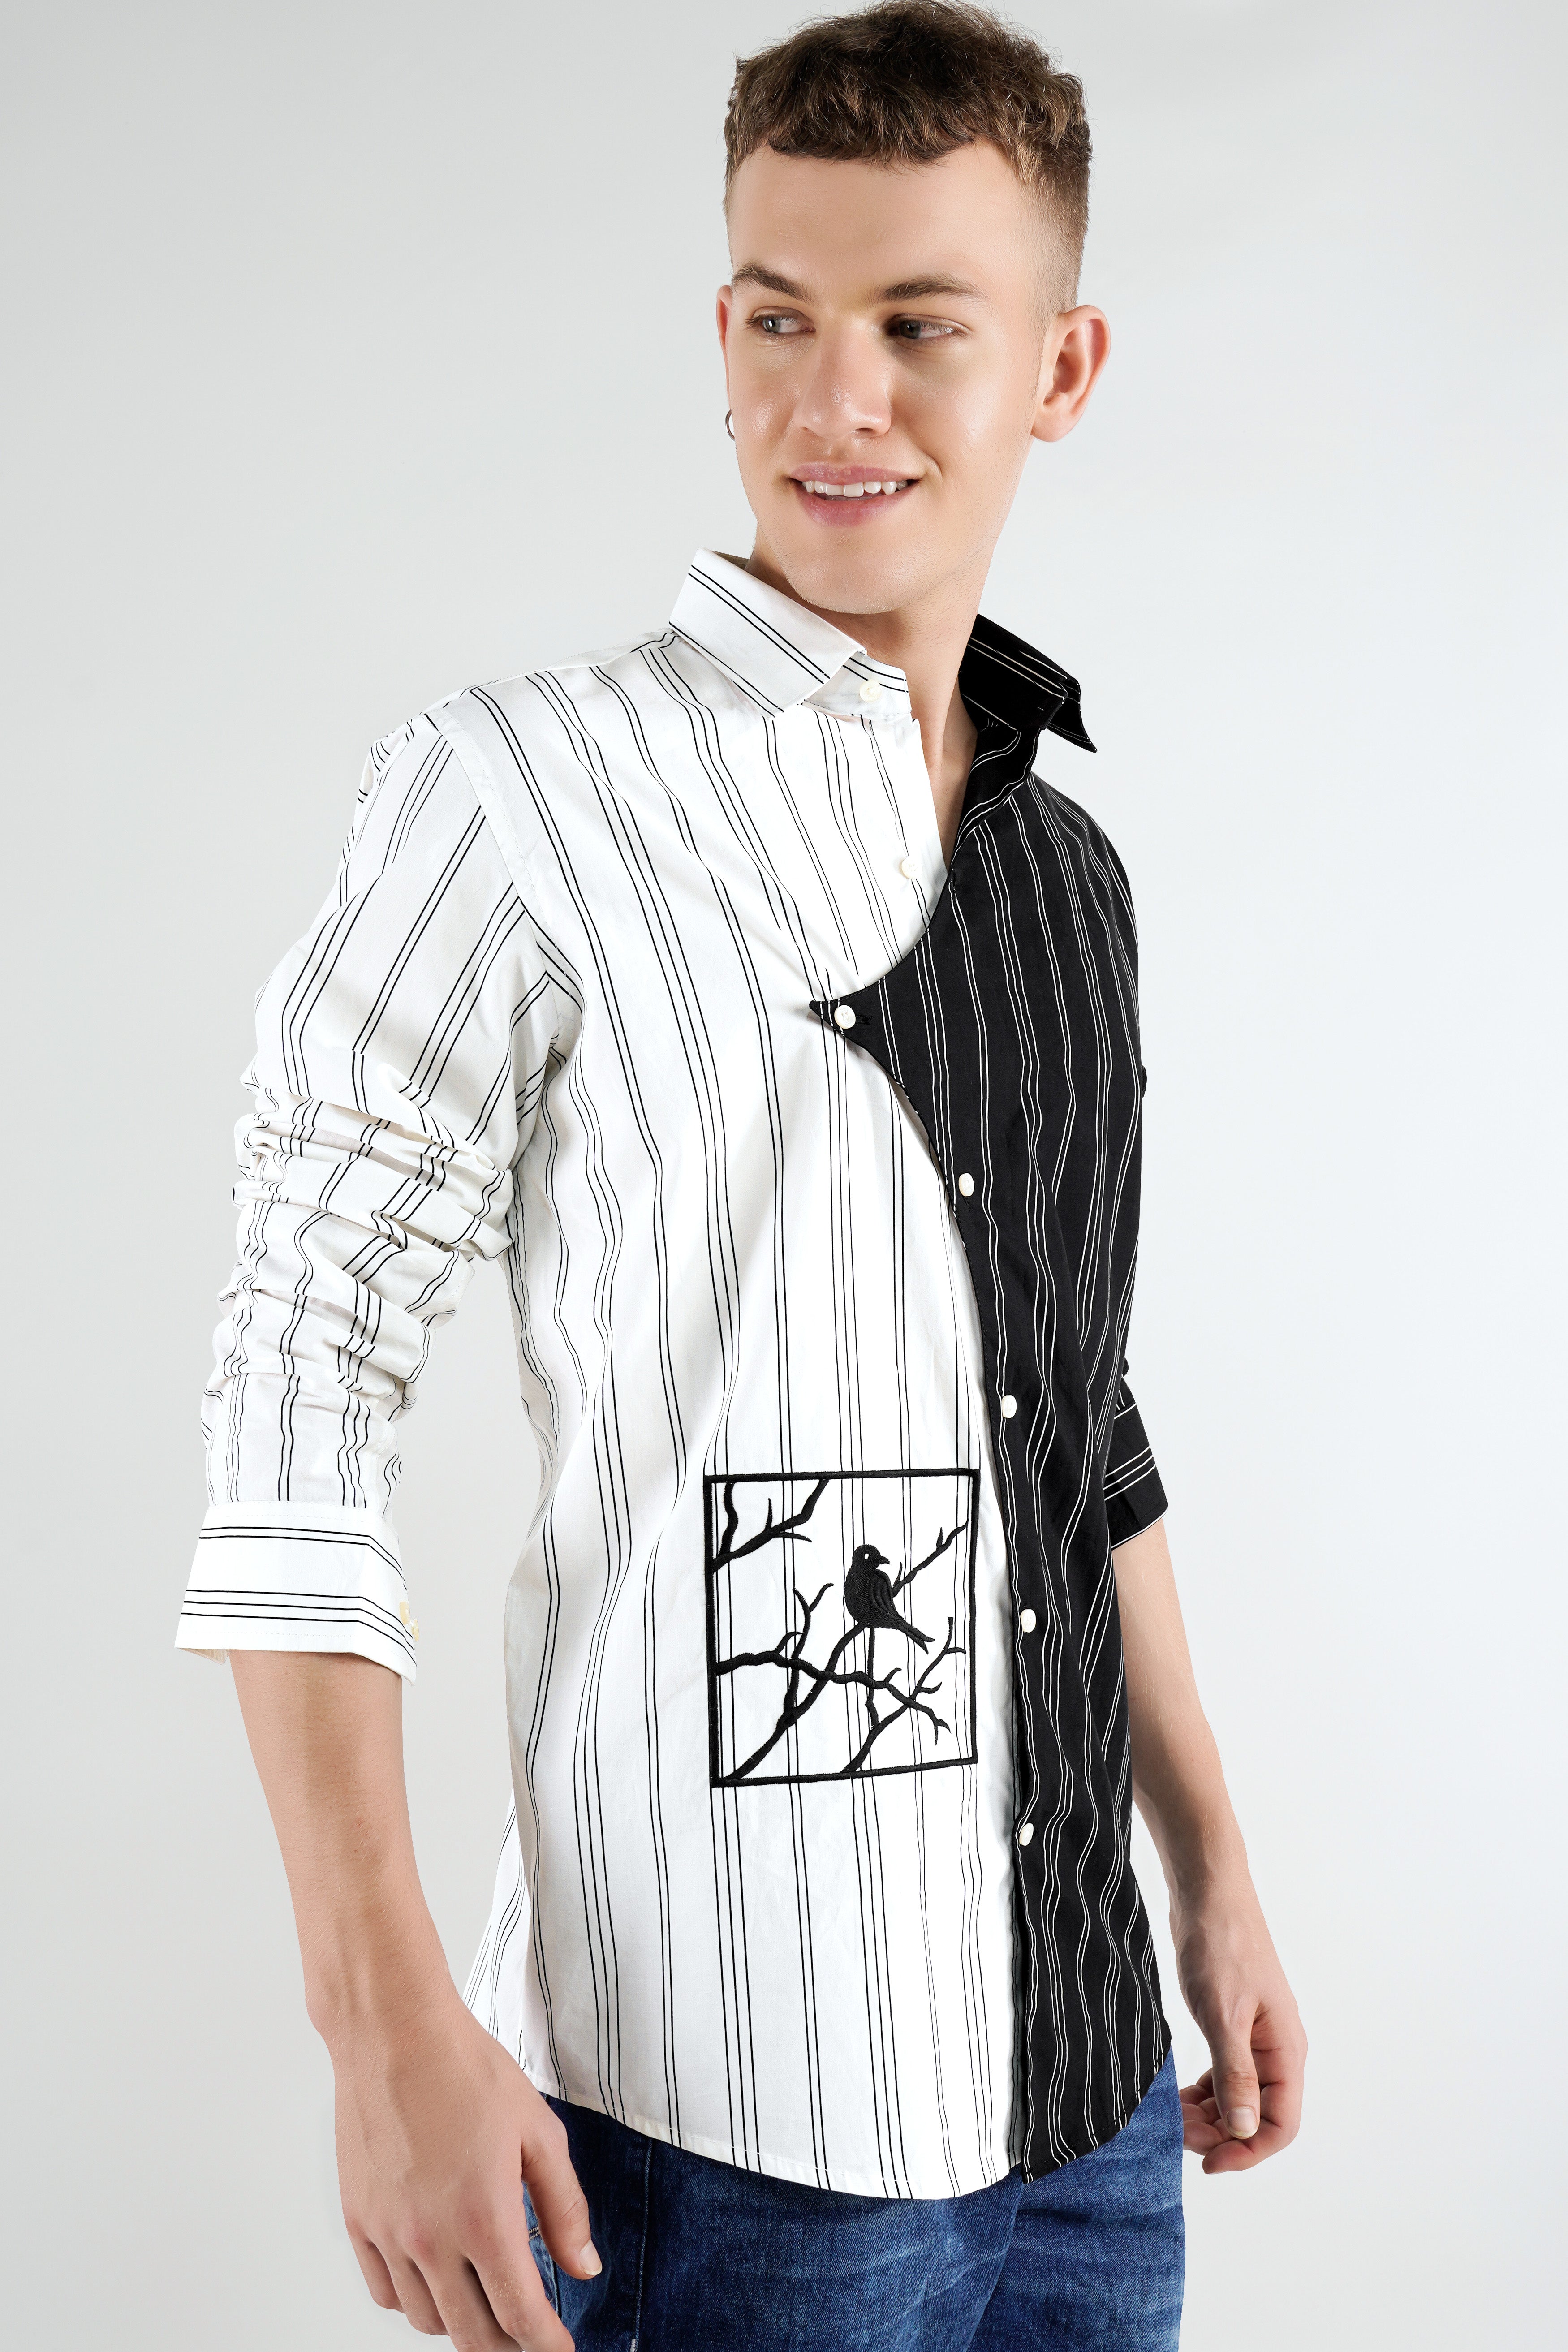 Half Withe with Half Black Pin Striped Embellished with Embroidered Work Premium Cotton Designer Shirt